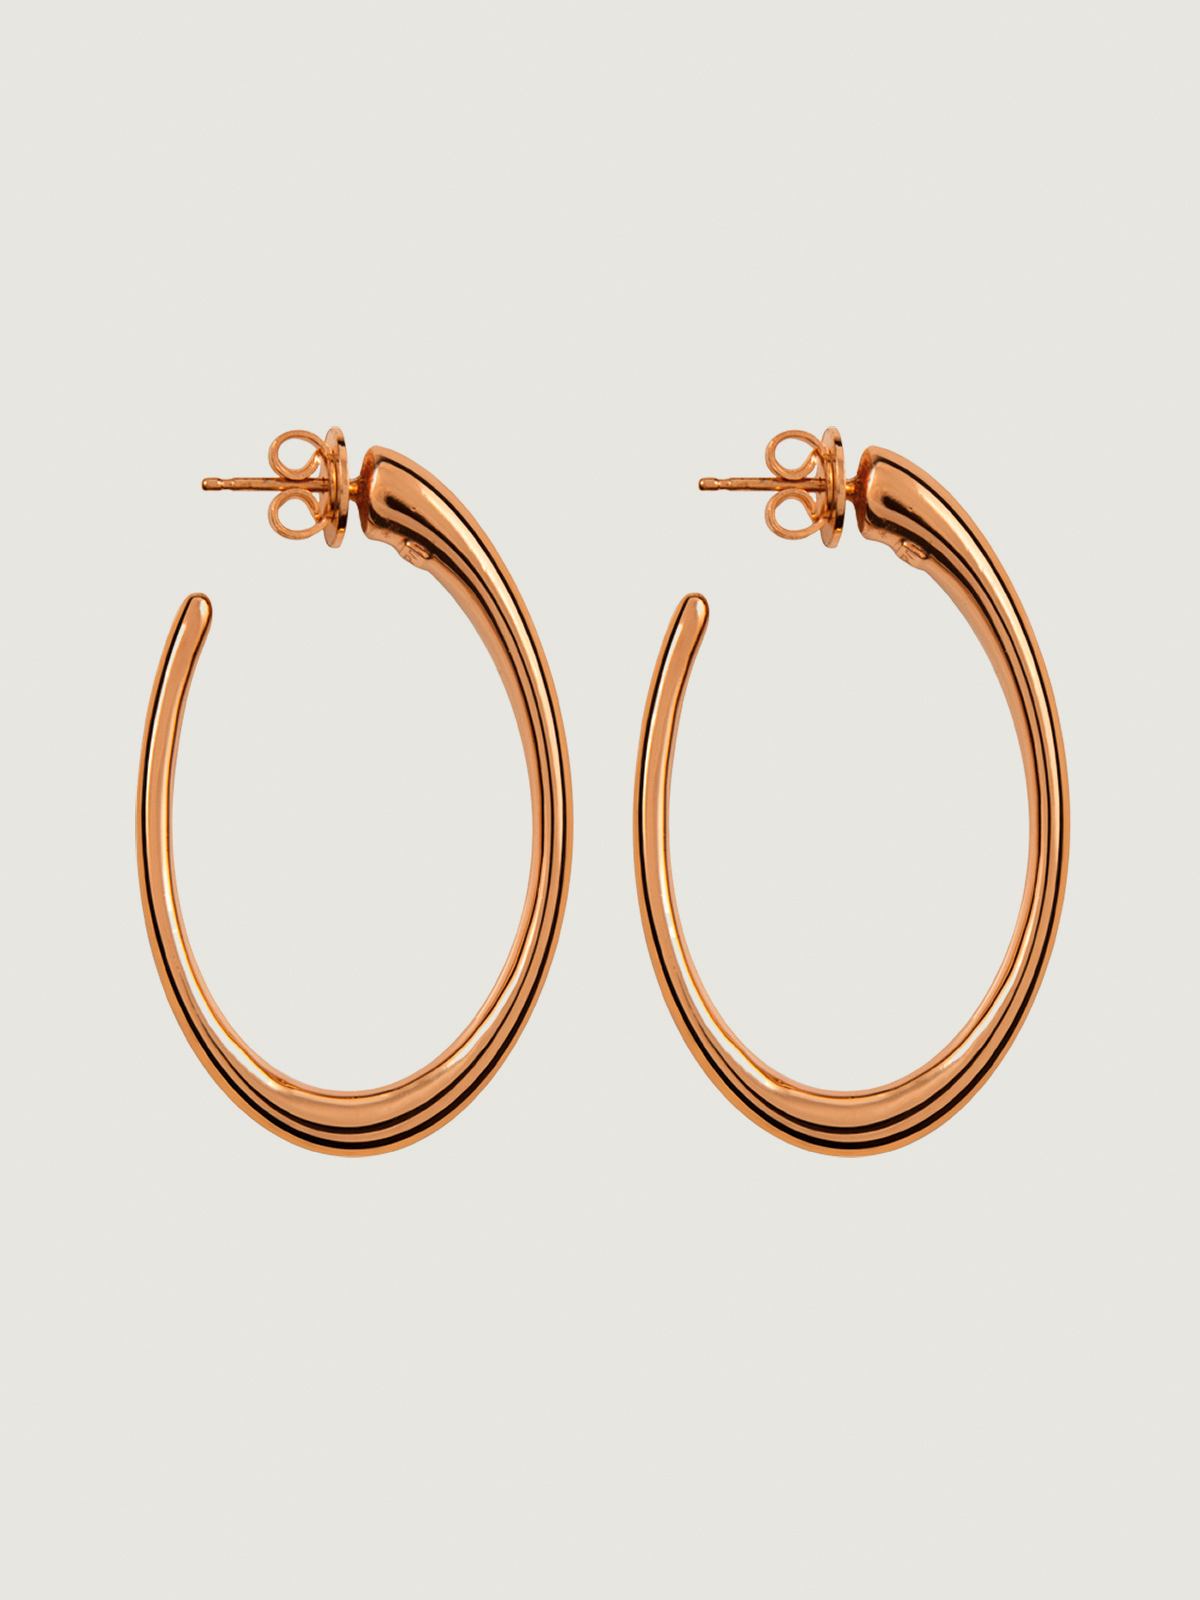 Large hoop earrings made of 925 silver coated in 18K rose gold with an oval shape.